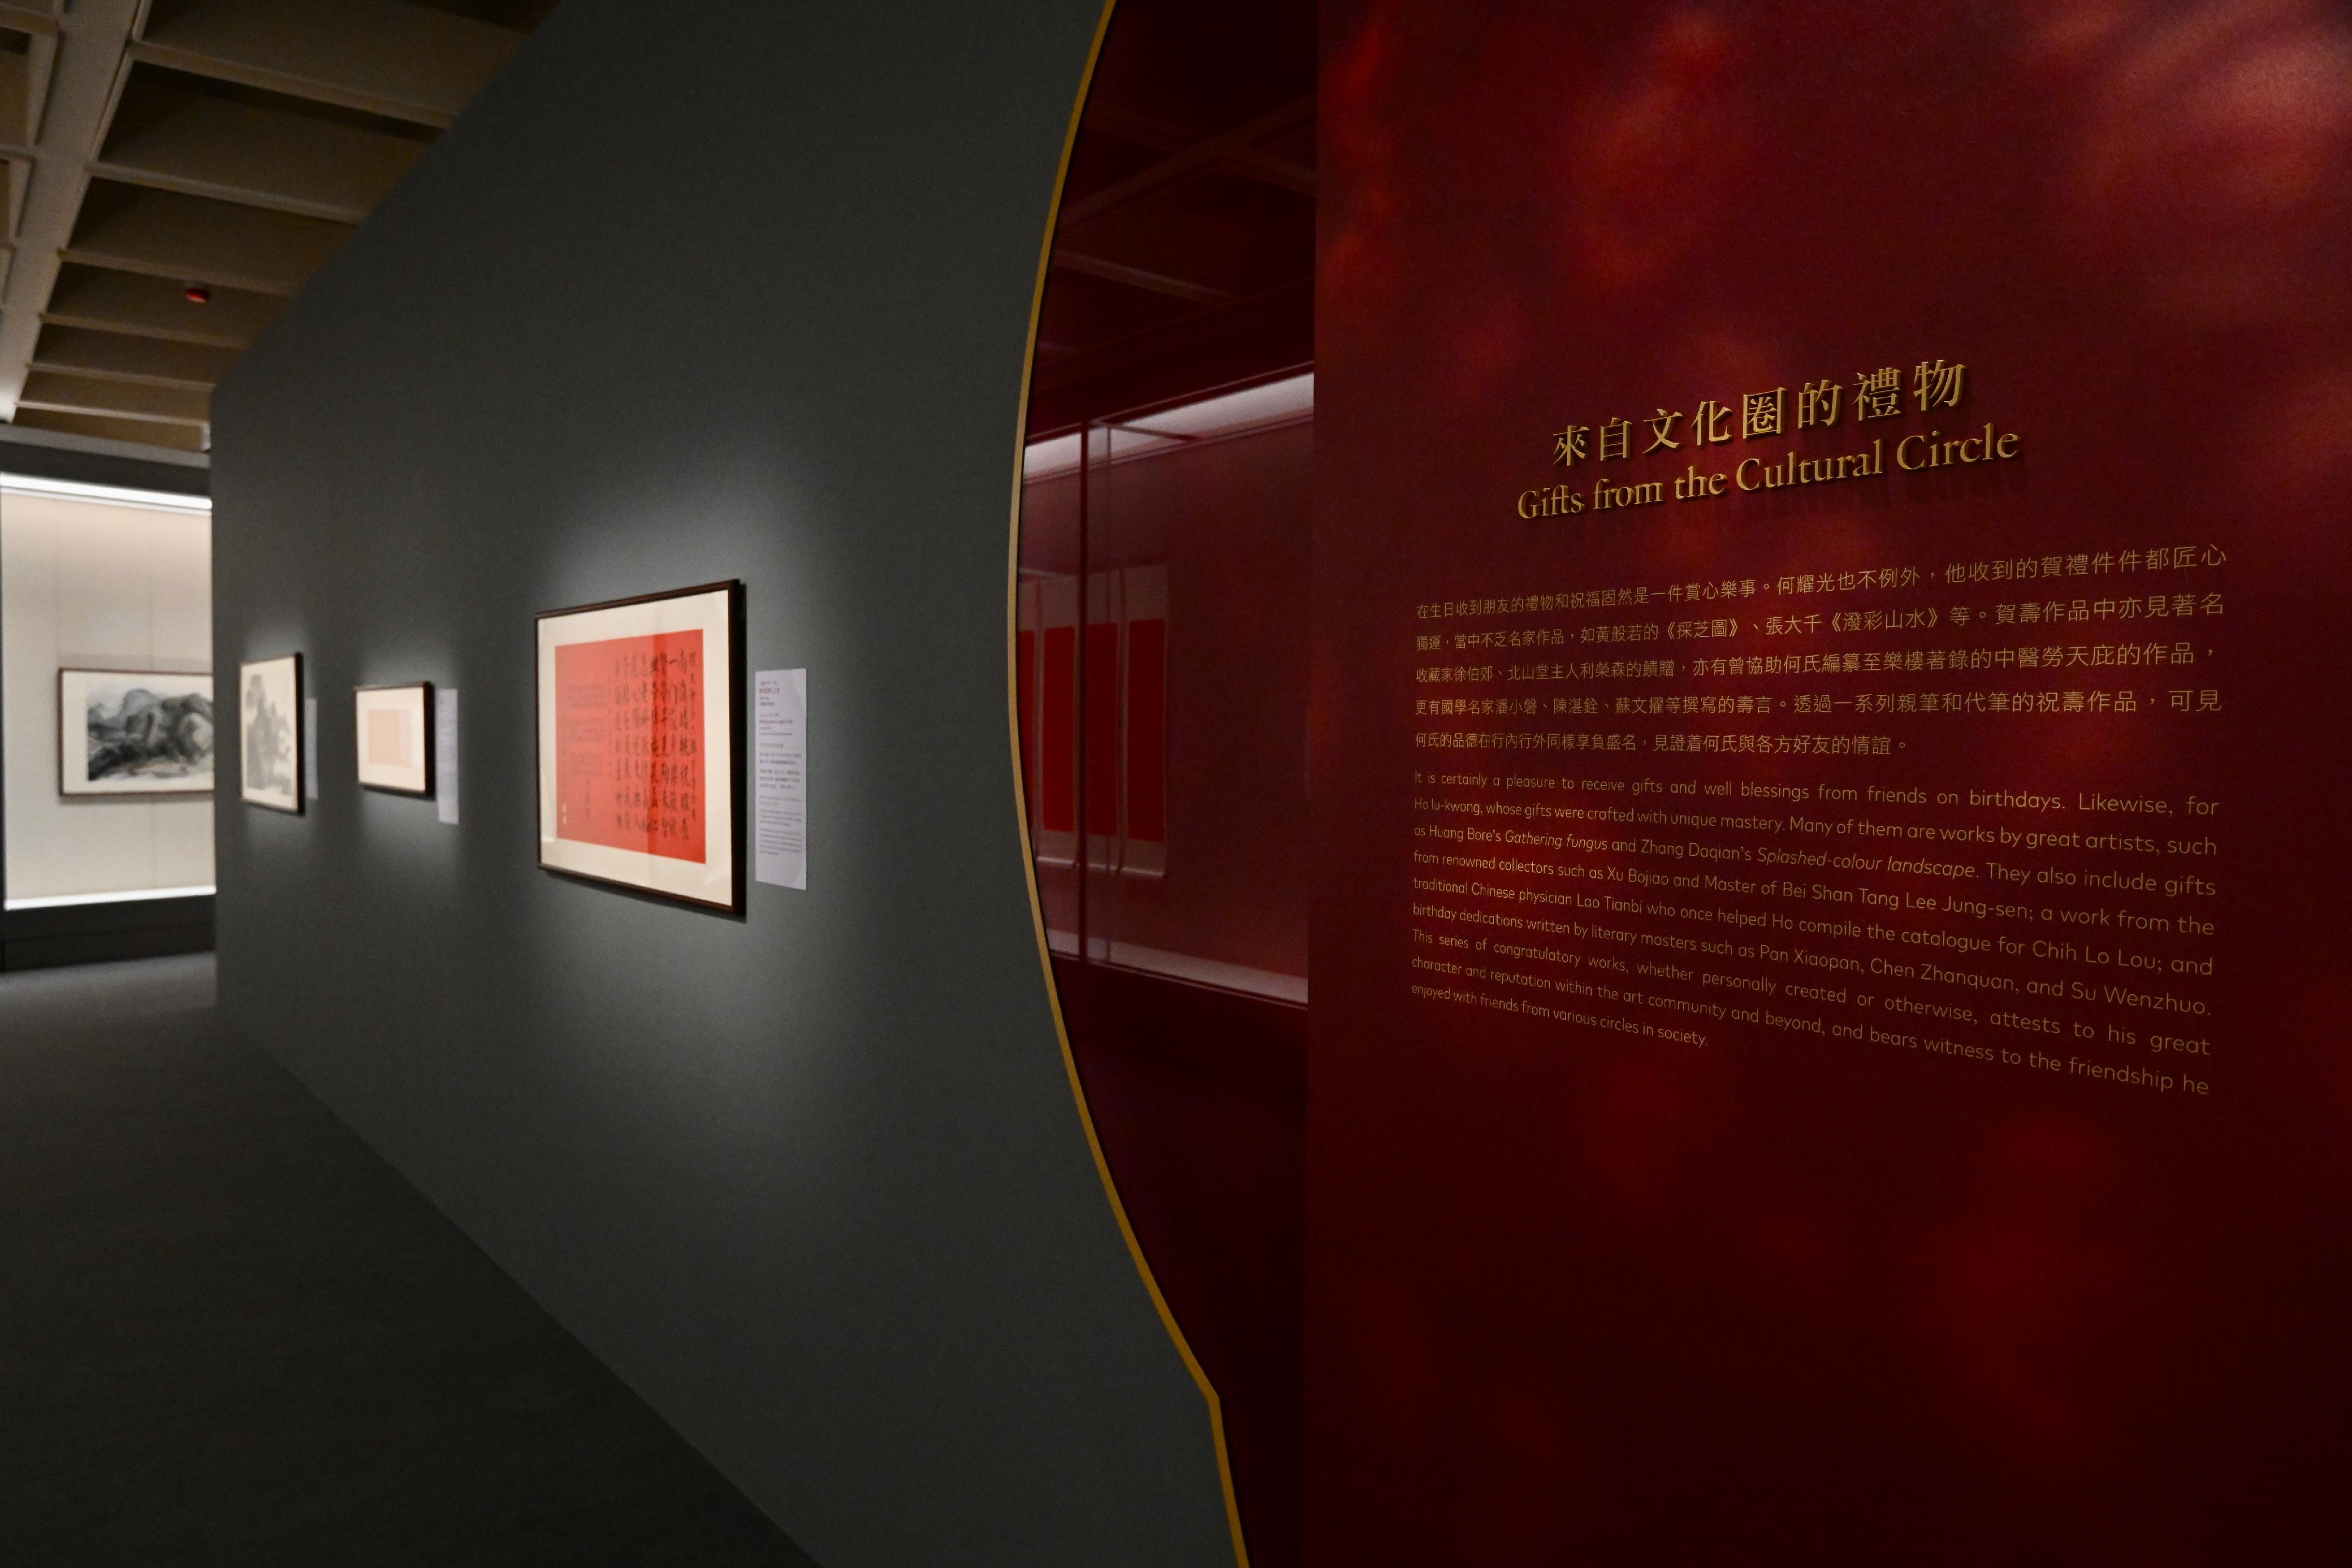 "Beyond Blessings: Birthday Greetings for the Master of Chih Lo Lou" exhibition will be held at the Hong Kong Museum of Art from tomorrow (July 14). Taking Ho Iu-kwong's 60th birthday in 1966 as the theme, the exhibition features works gifted by his notable friends from Hong Kong's literati circle. 